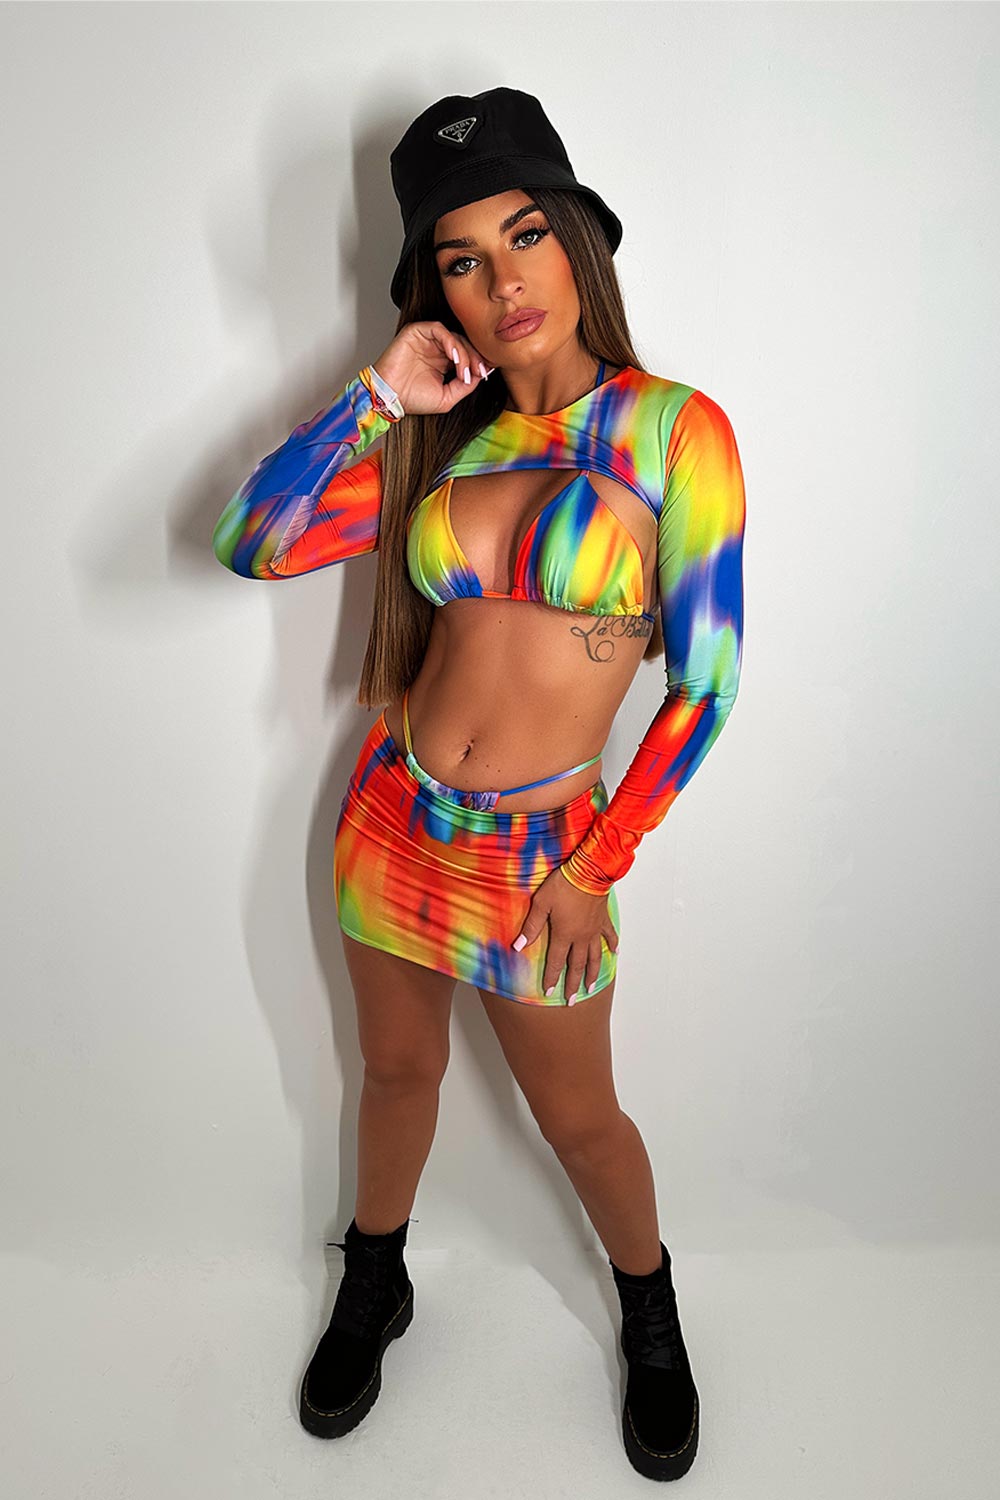 neon bright rave outfits uk